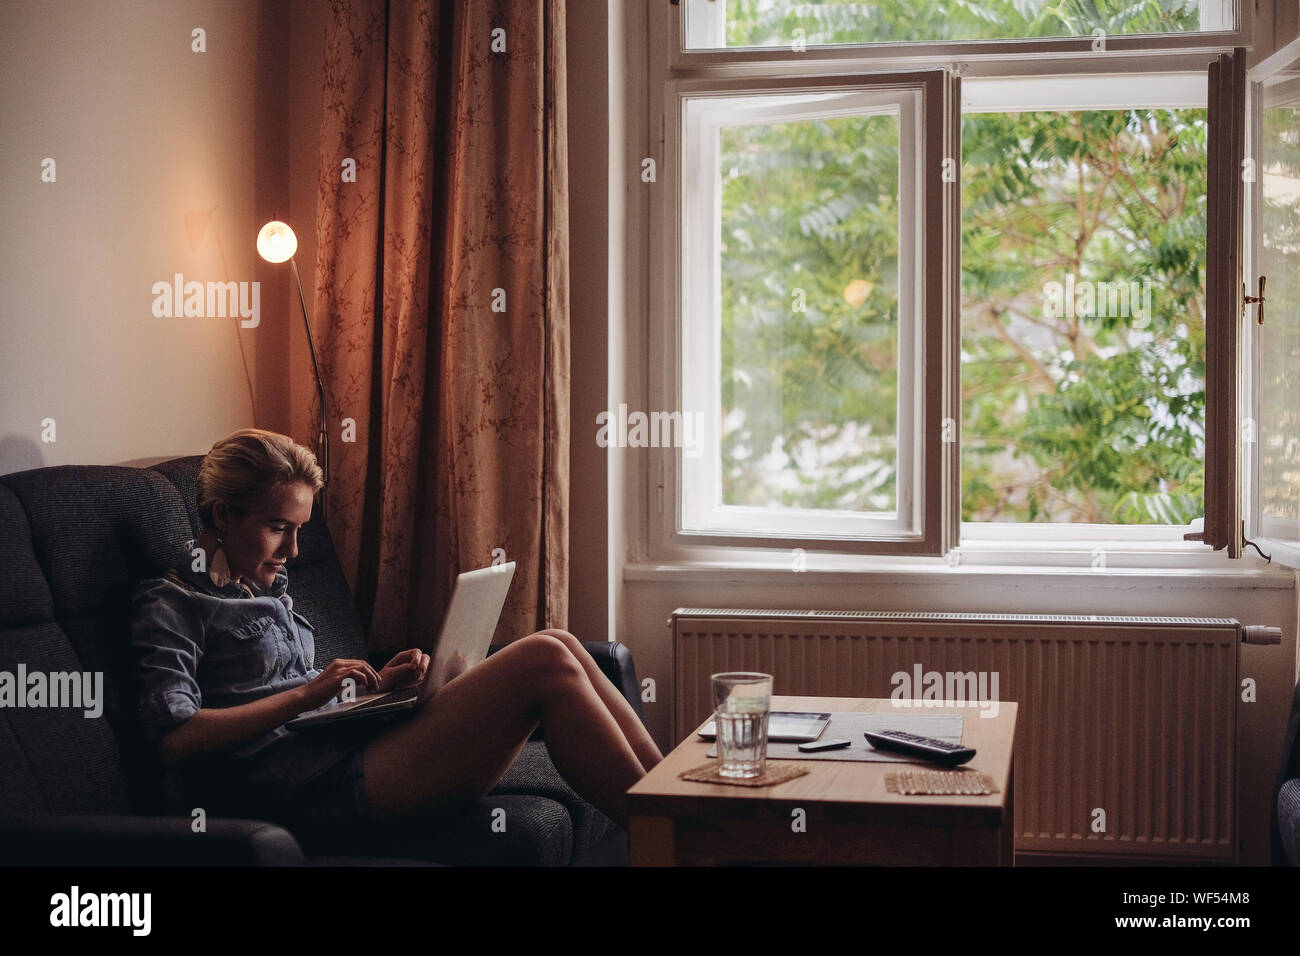 Woman Using Laptop In Living Room Stock Photo